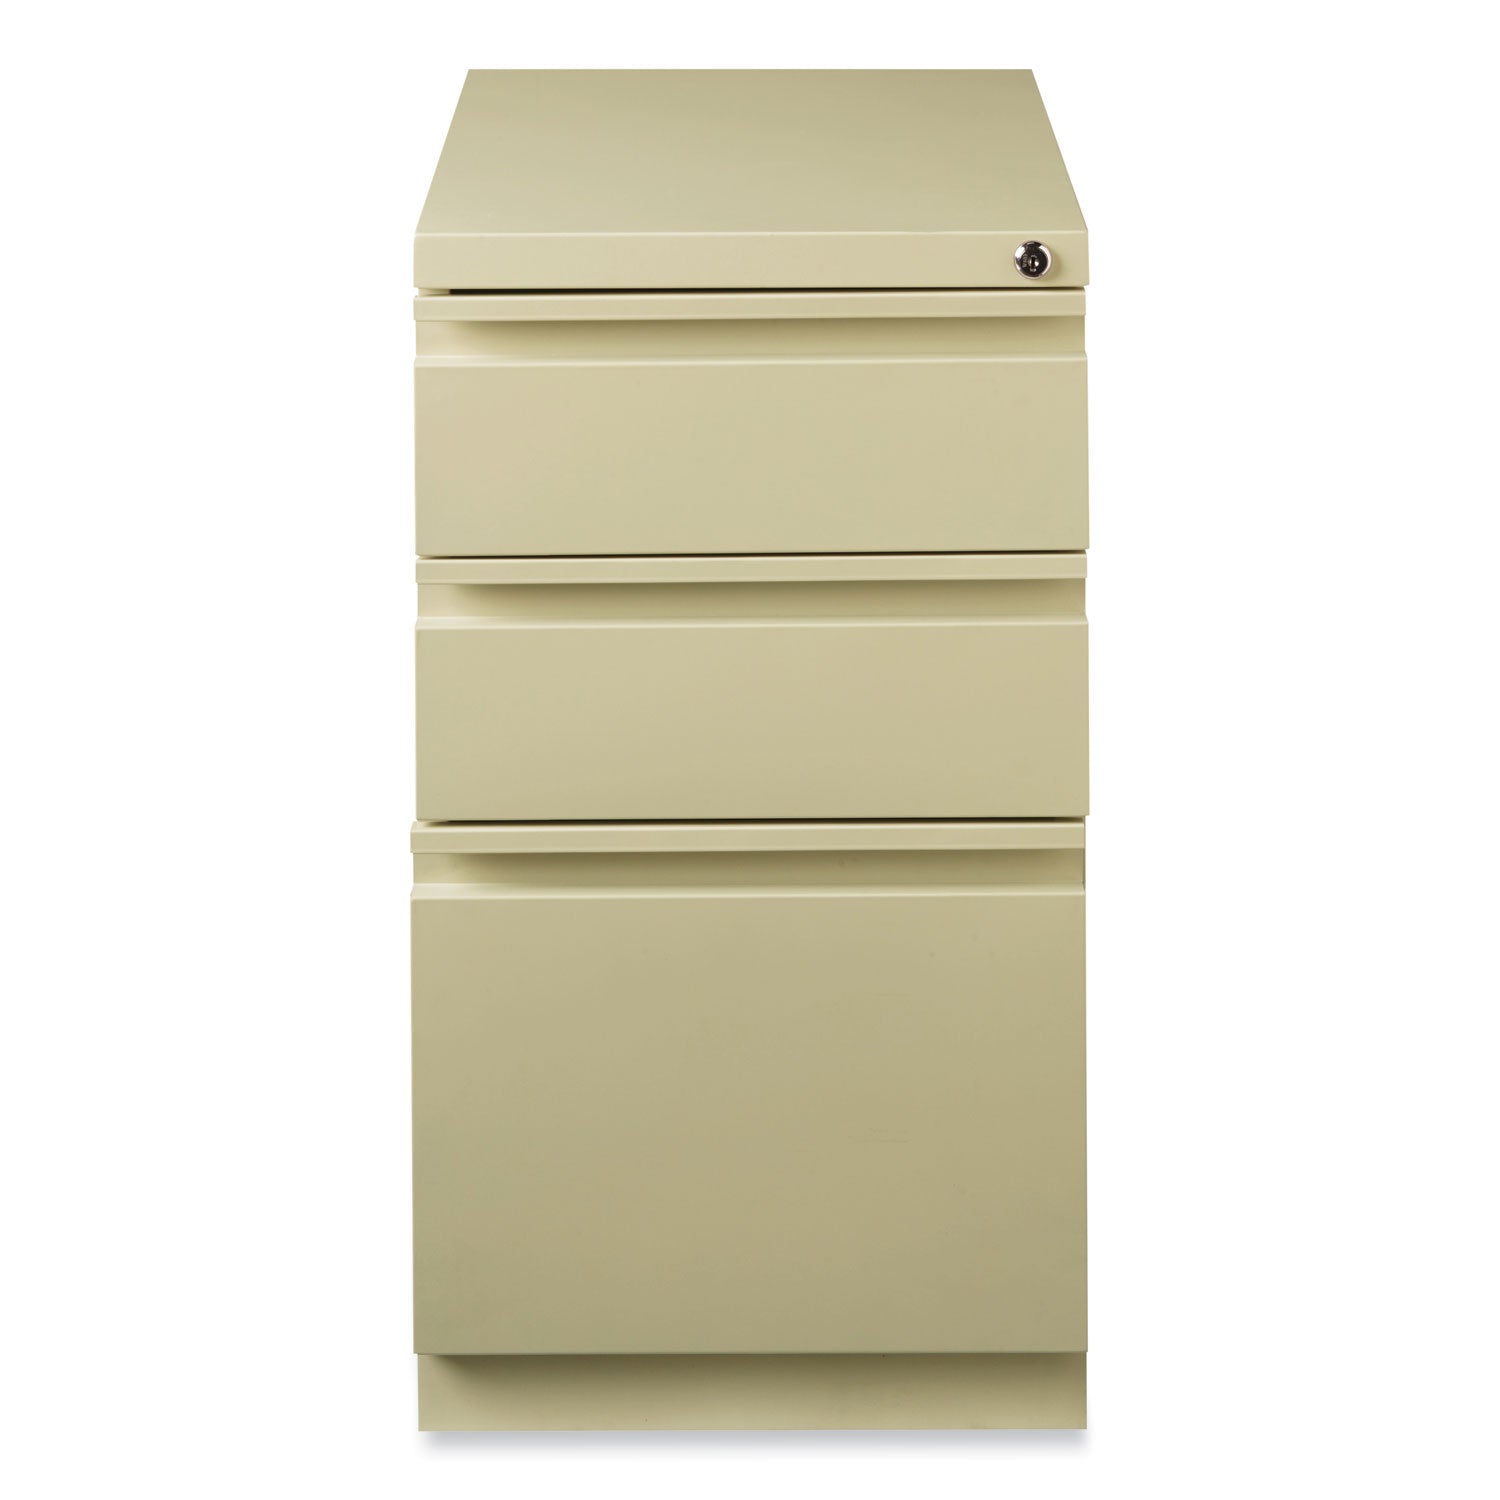 full-width-pull-20-deep-mobile-pedestal-file-box-box-file-letter-putty-15-x-1988-x-2775-ships-in-4-6-business-days_hid18574 - 3